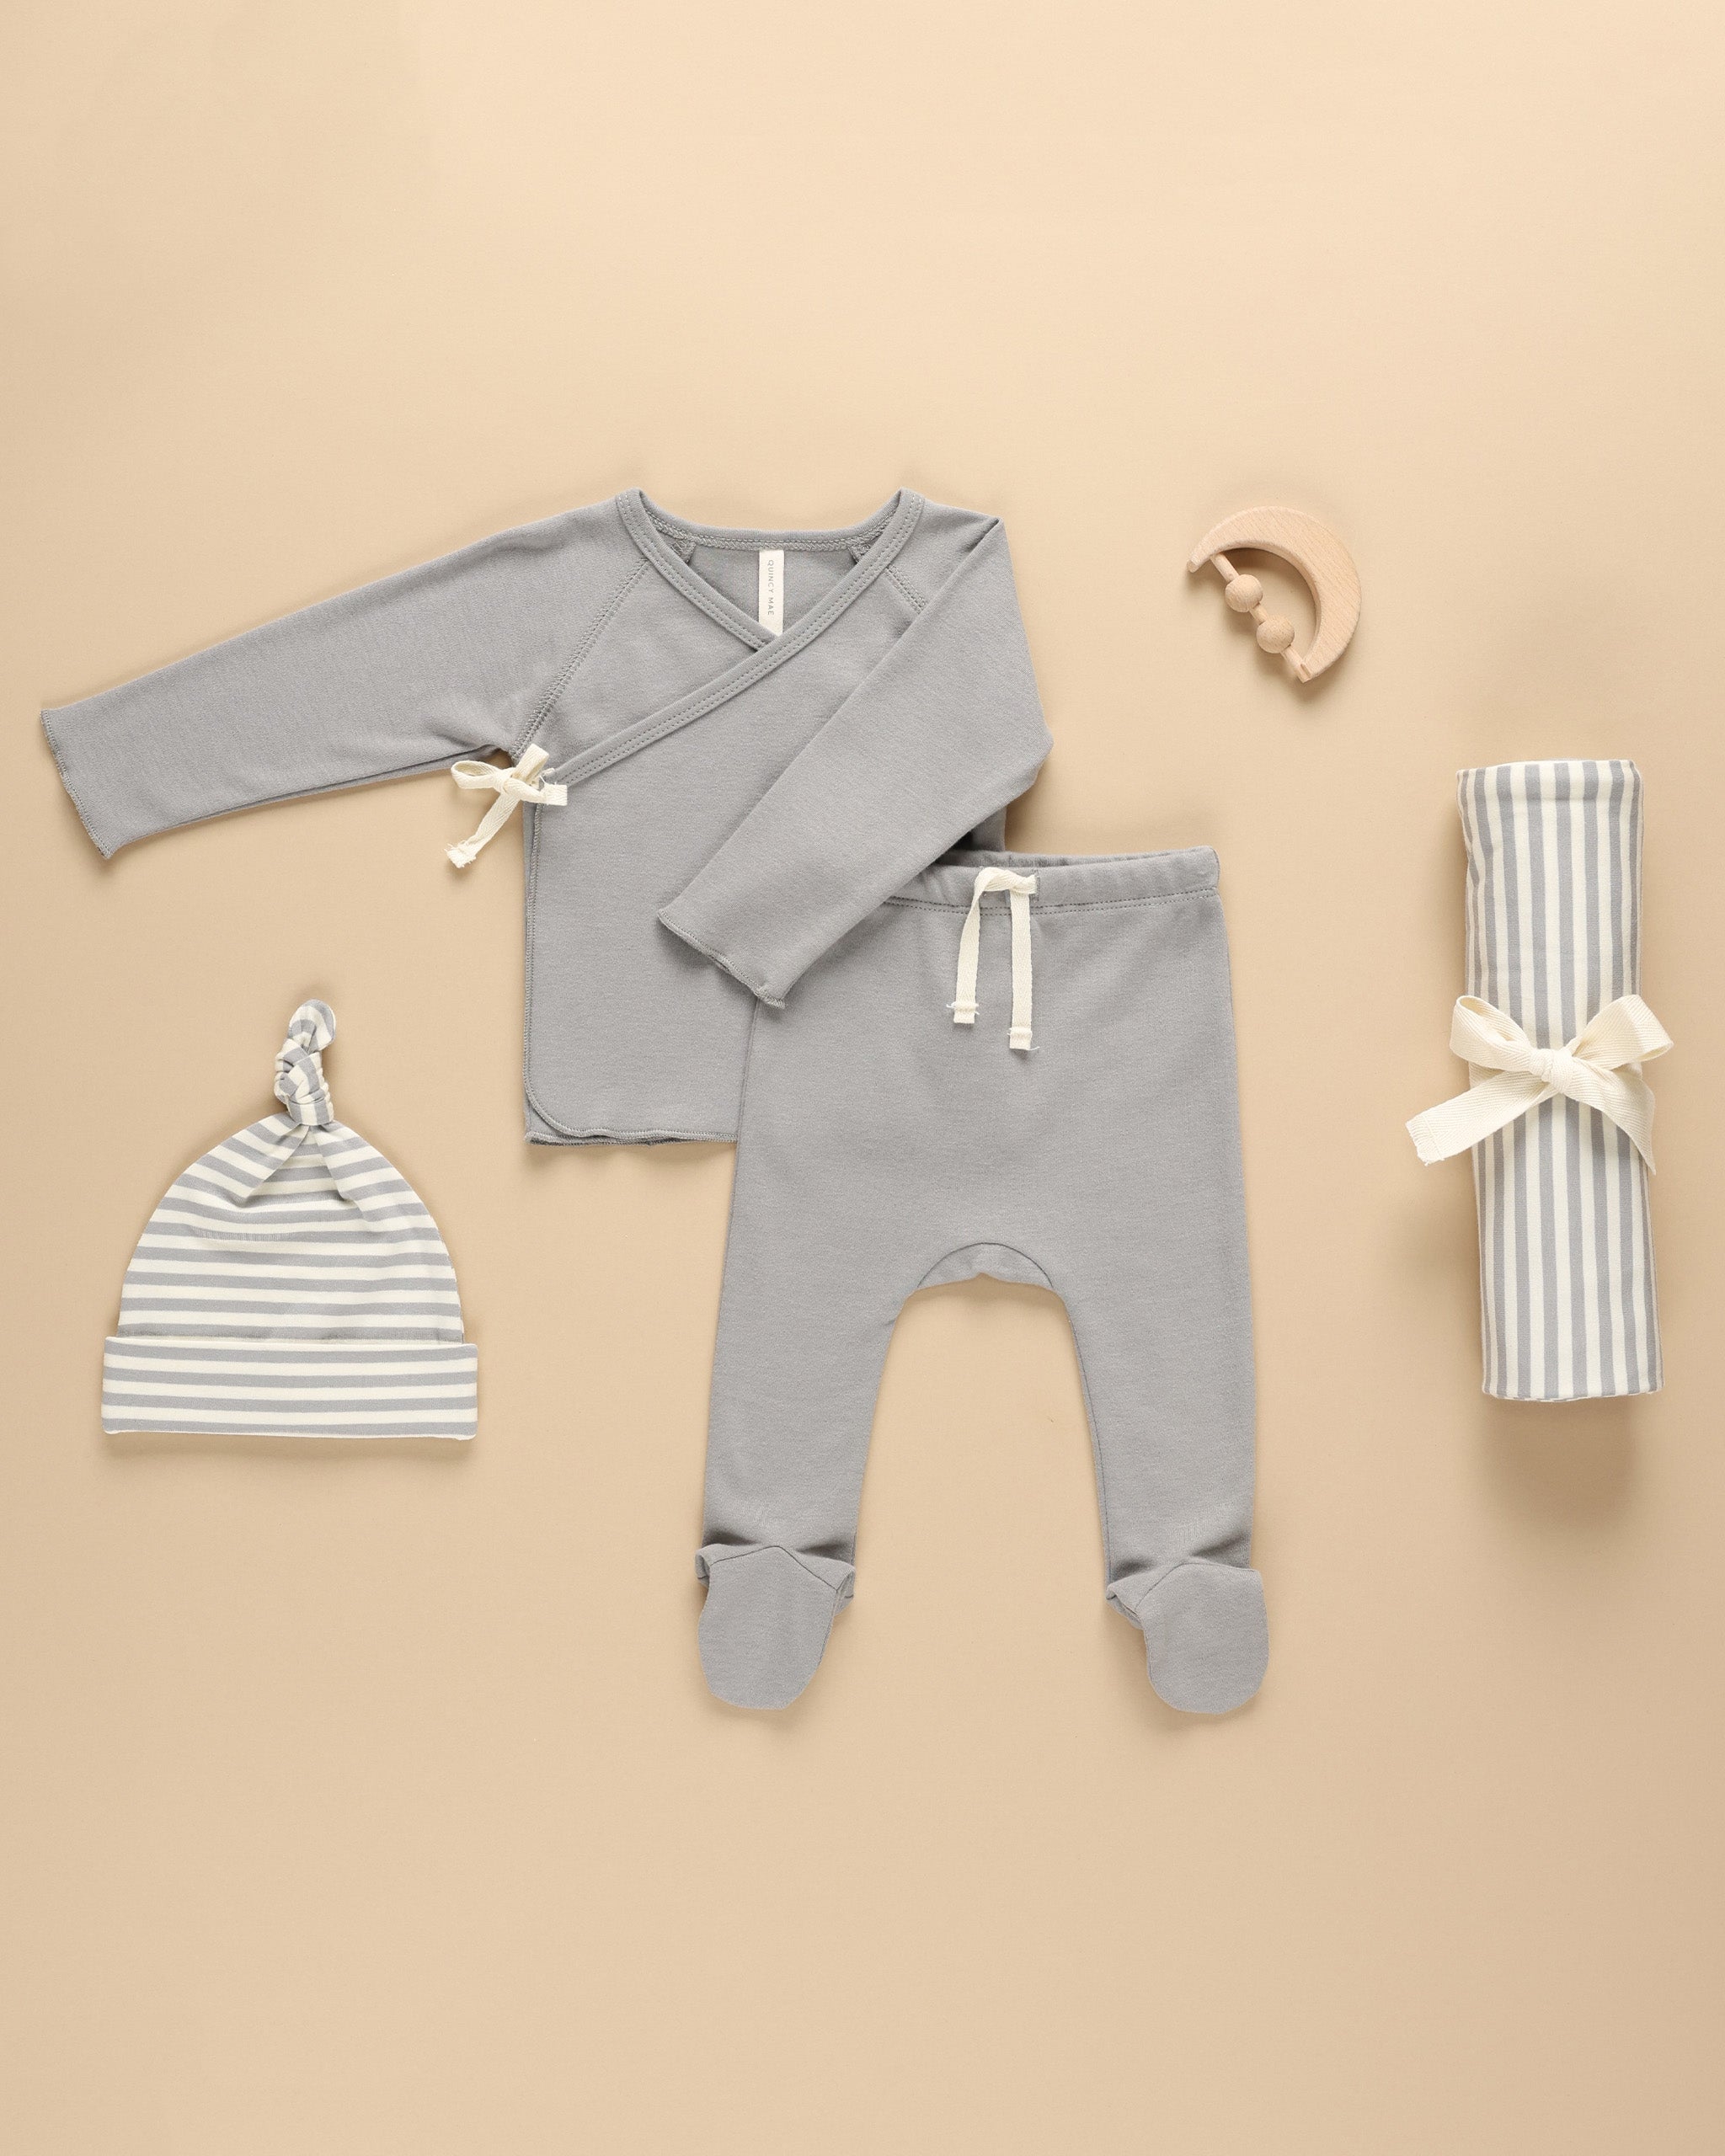 Swaddle || Dusty Blue Stripe - Rylee + Cru | Kids Clothes | Trendy Baby Clothes | Modern Infant Outfits |